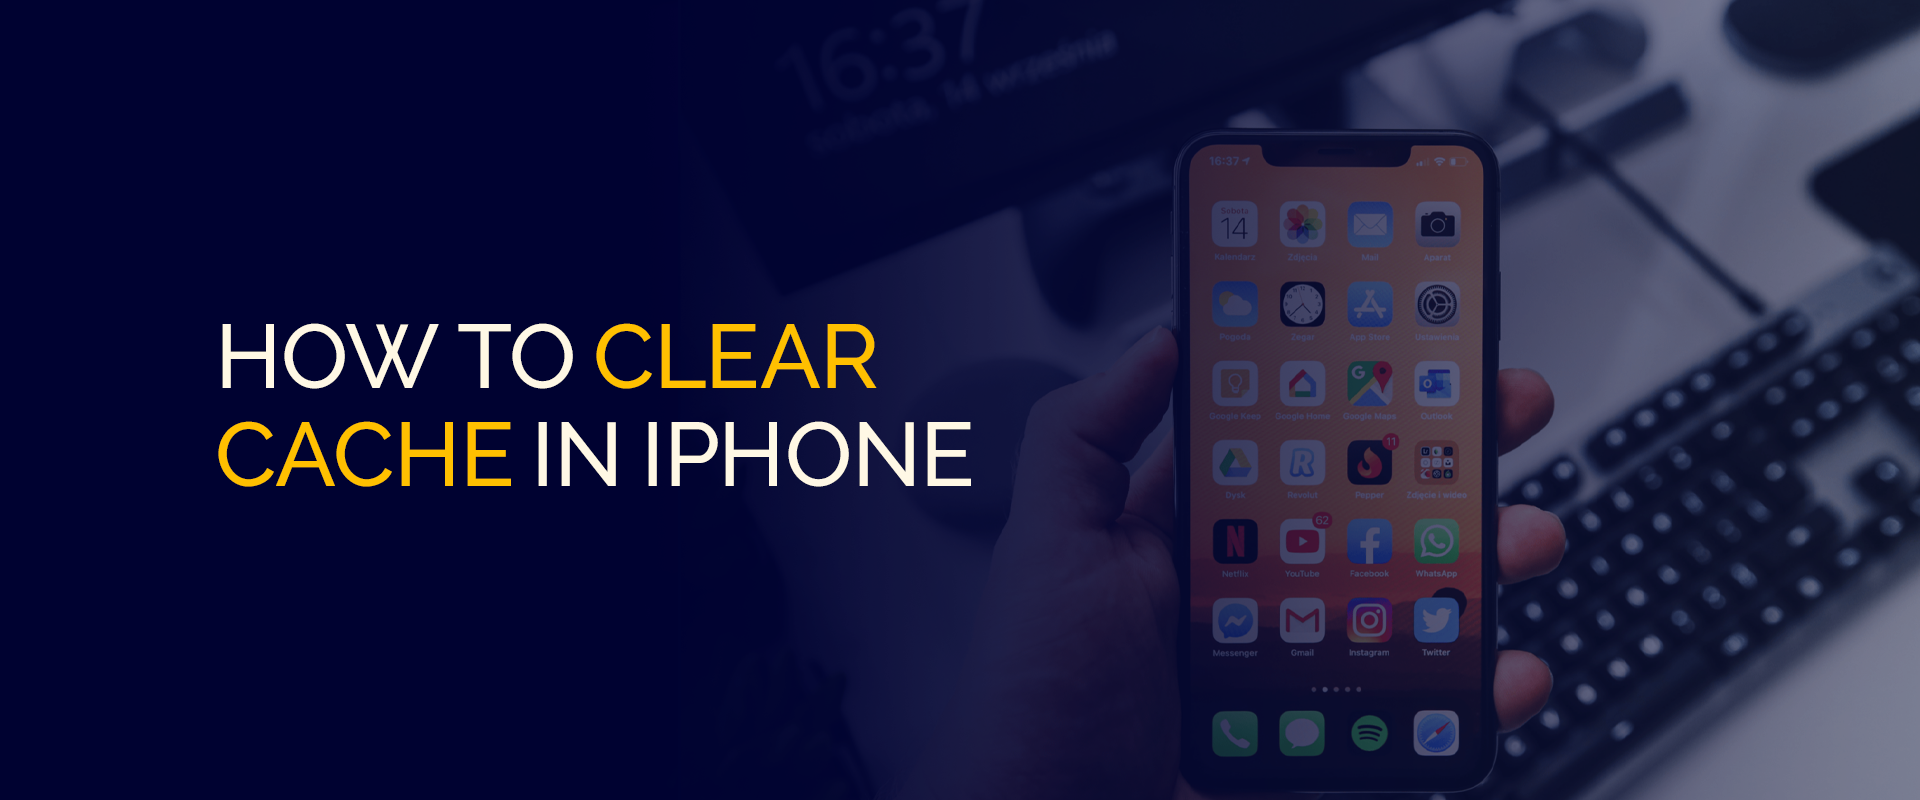 How to Clear Cache in iPhone